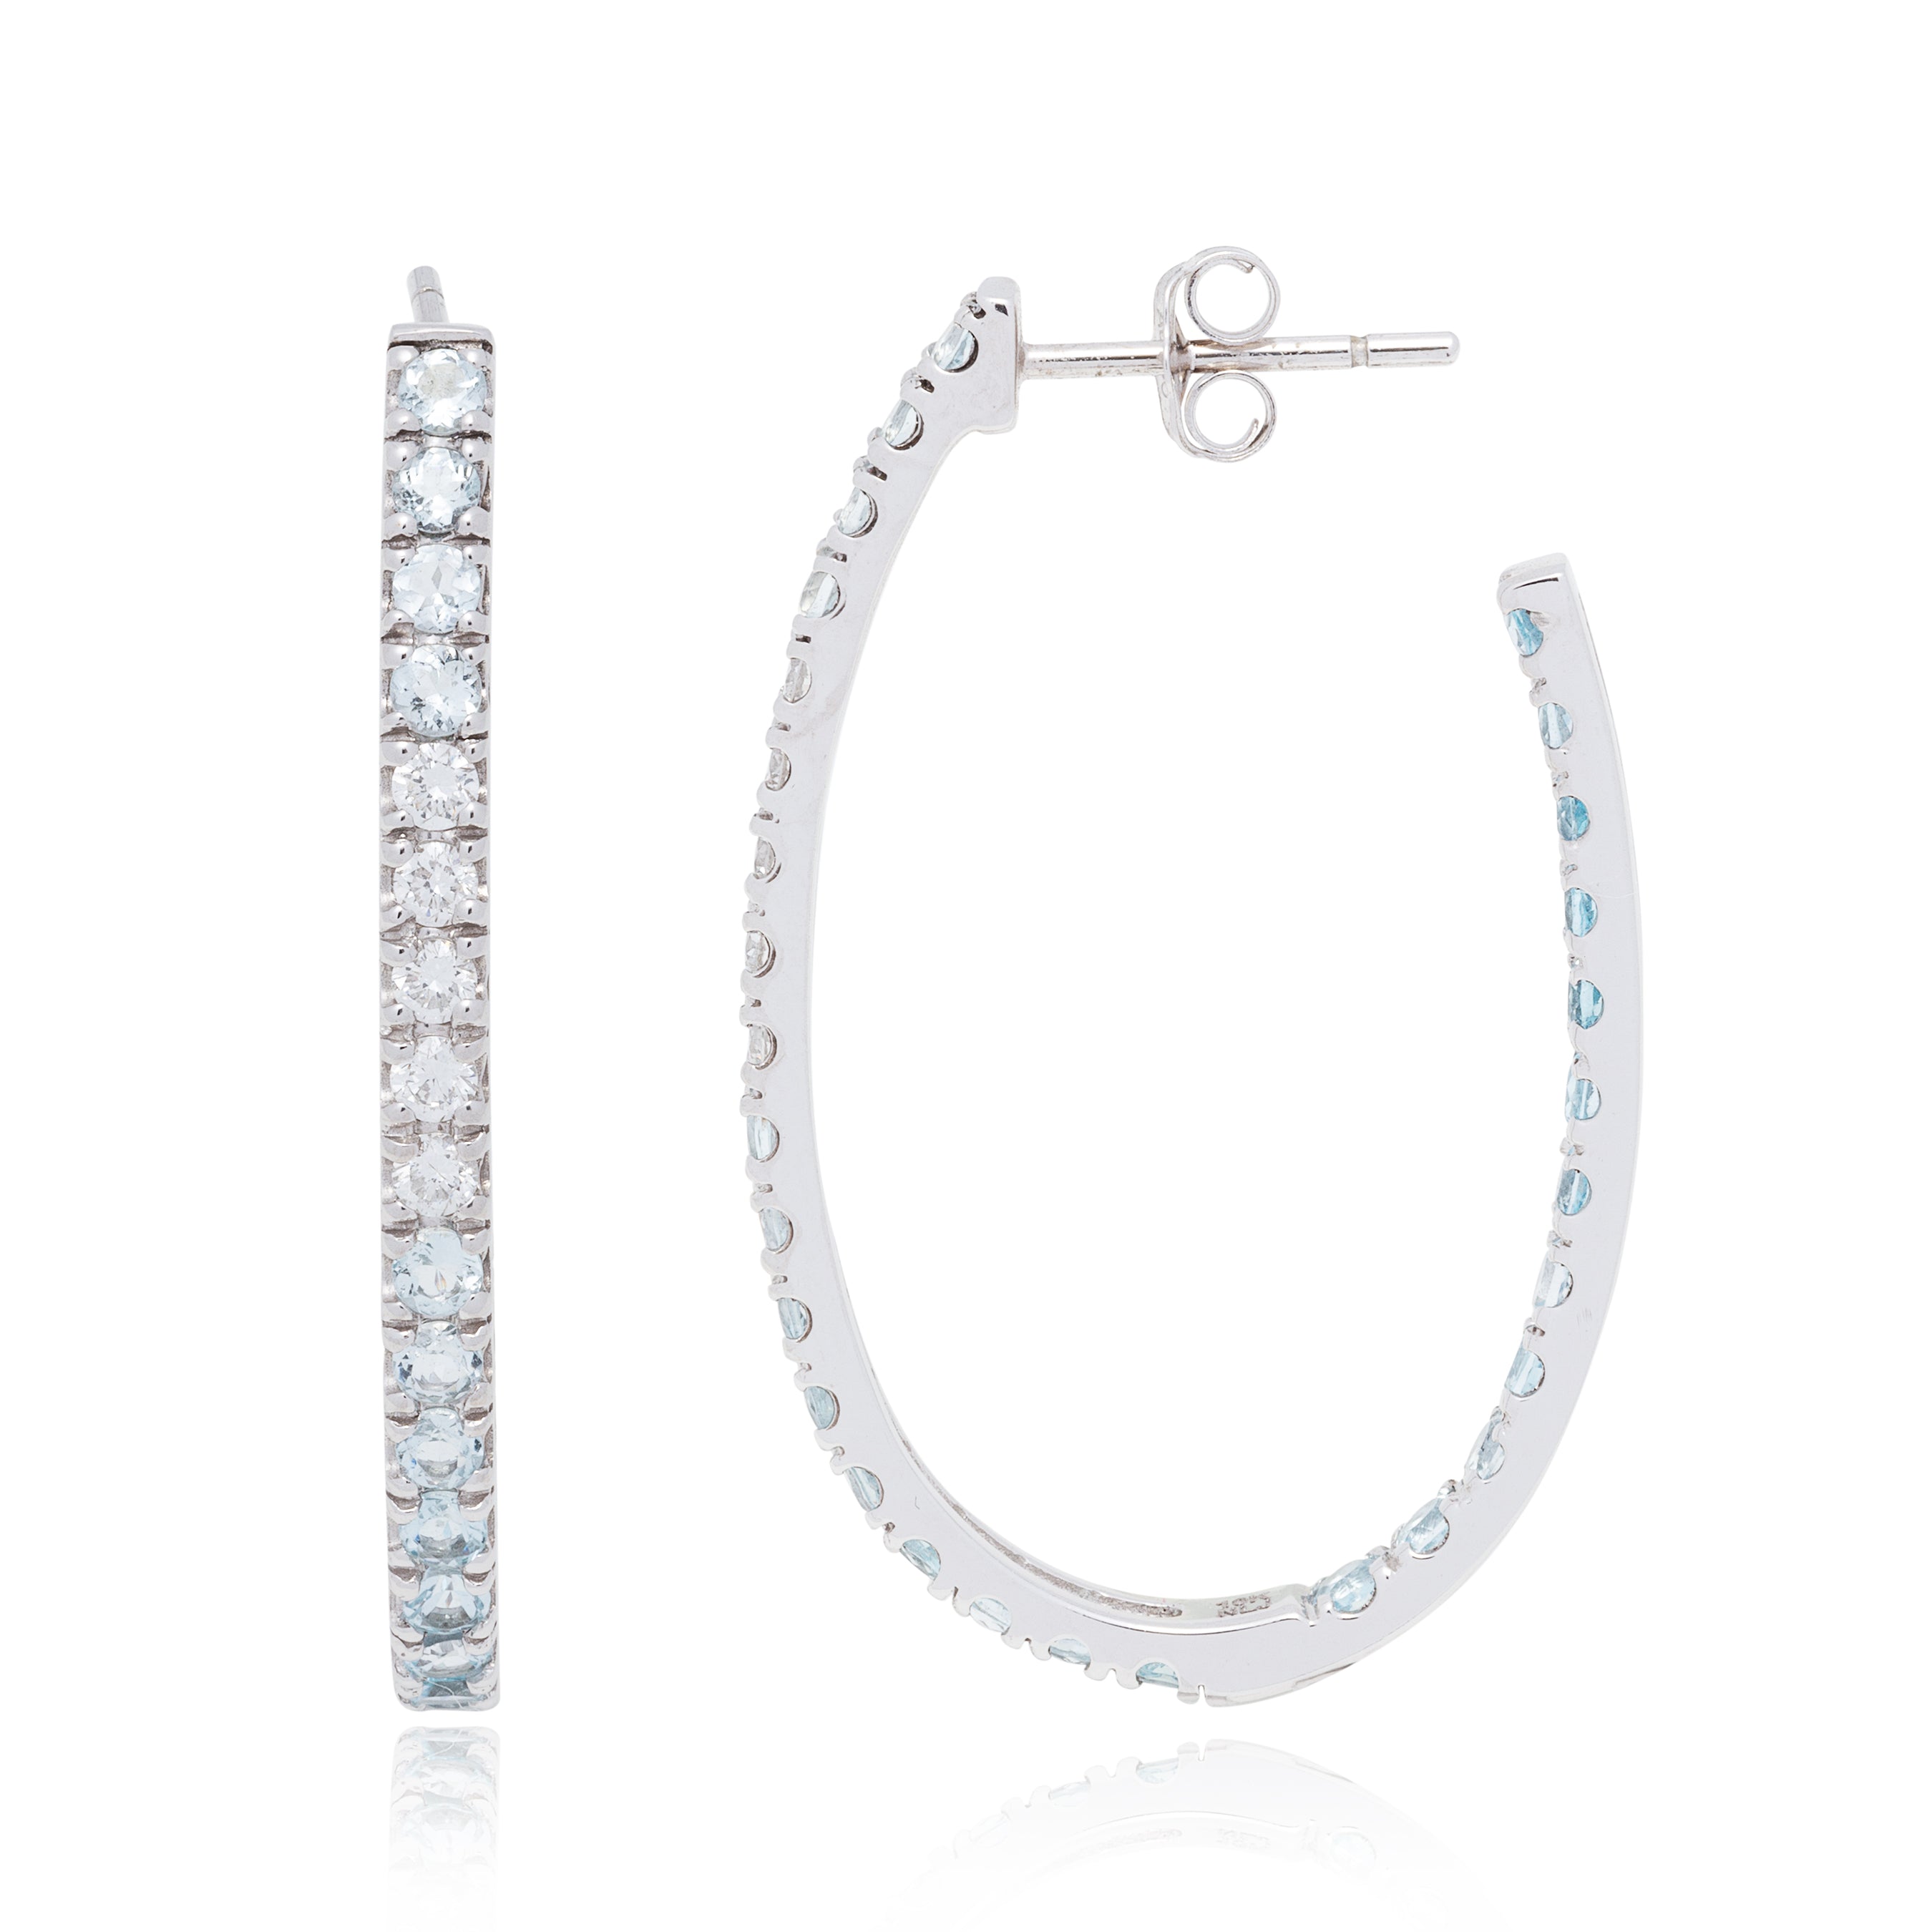 Pop aquamarine and diamond hoop earrings, 10K rhodium plated solid white gold. Our quintessential diamond hoops with a fabulous twist! International shipping available.